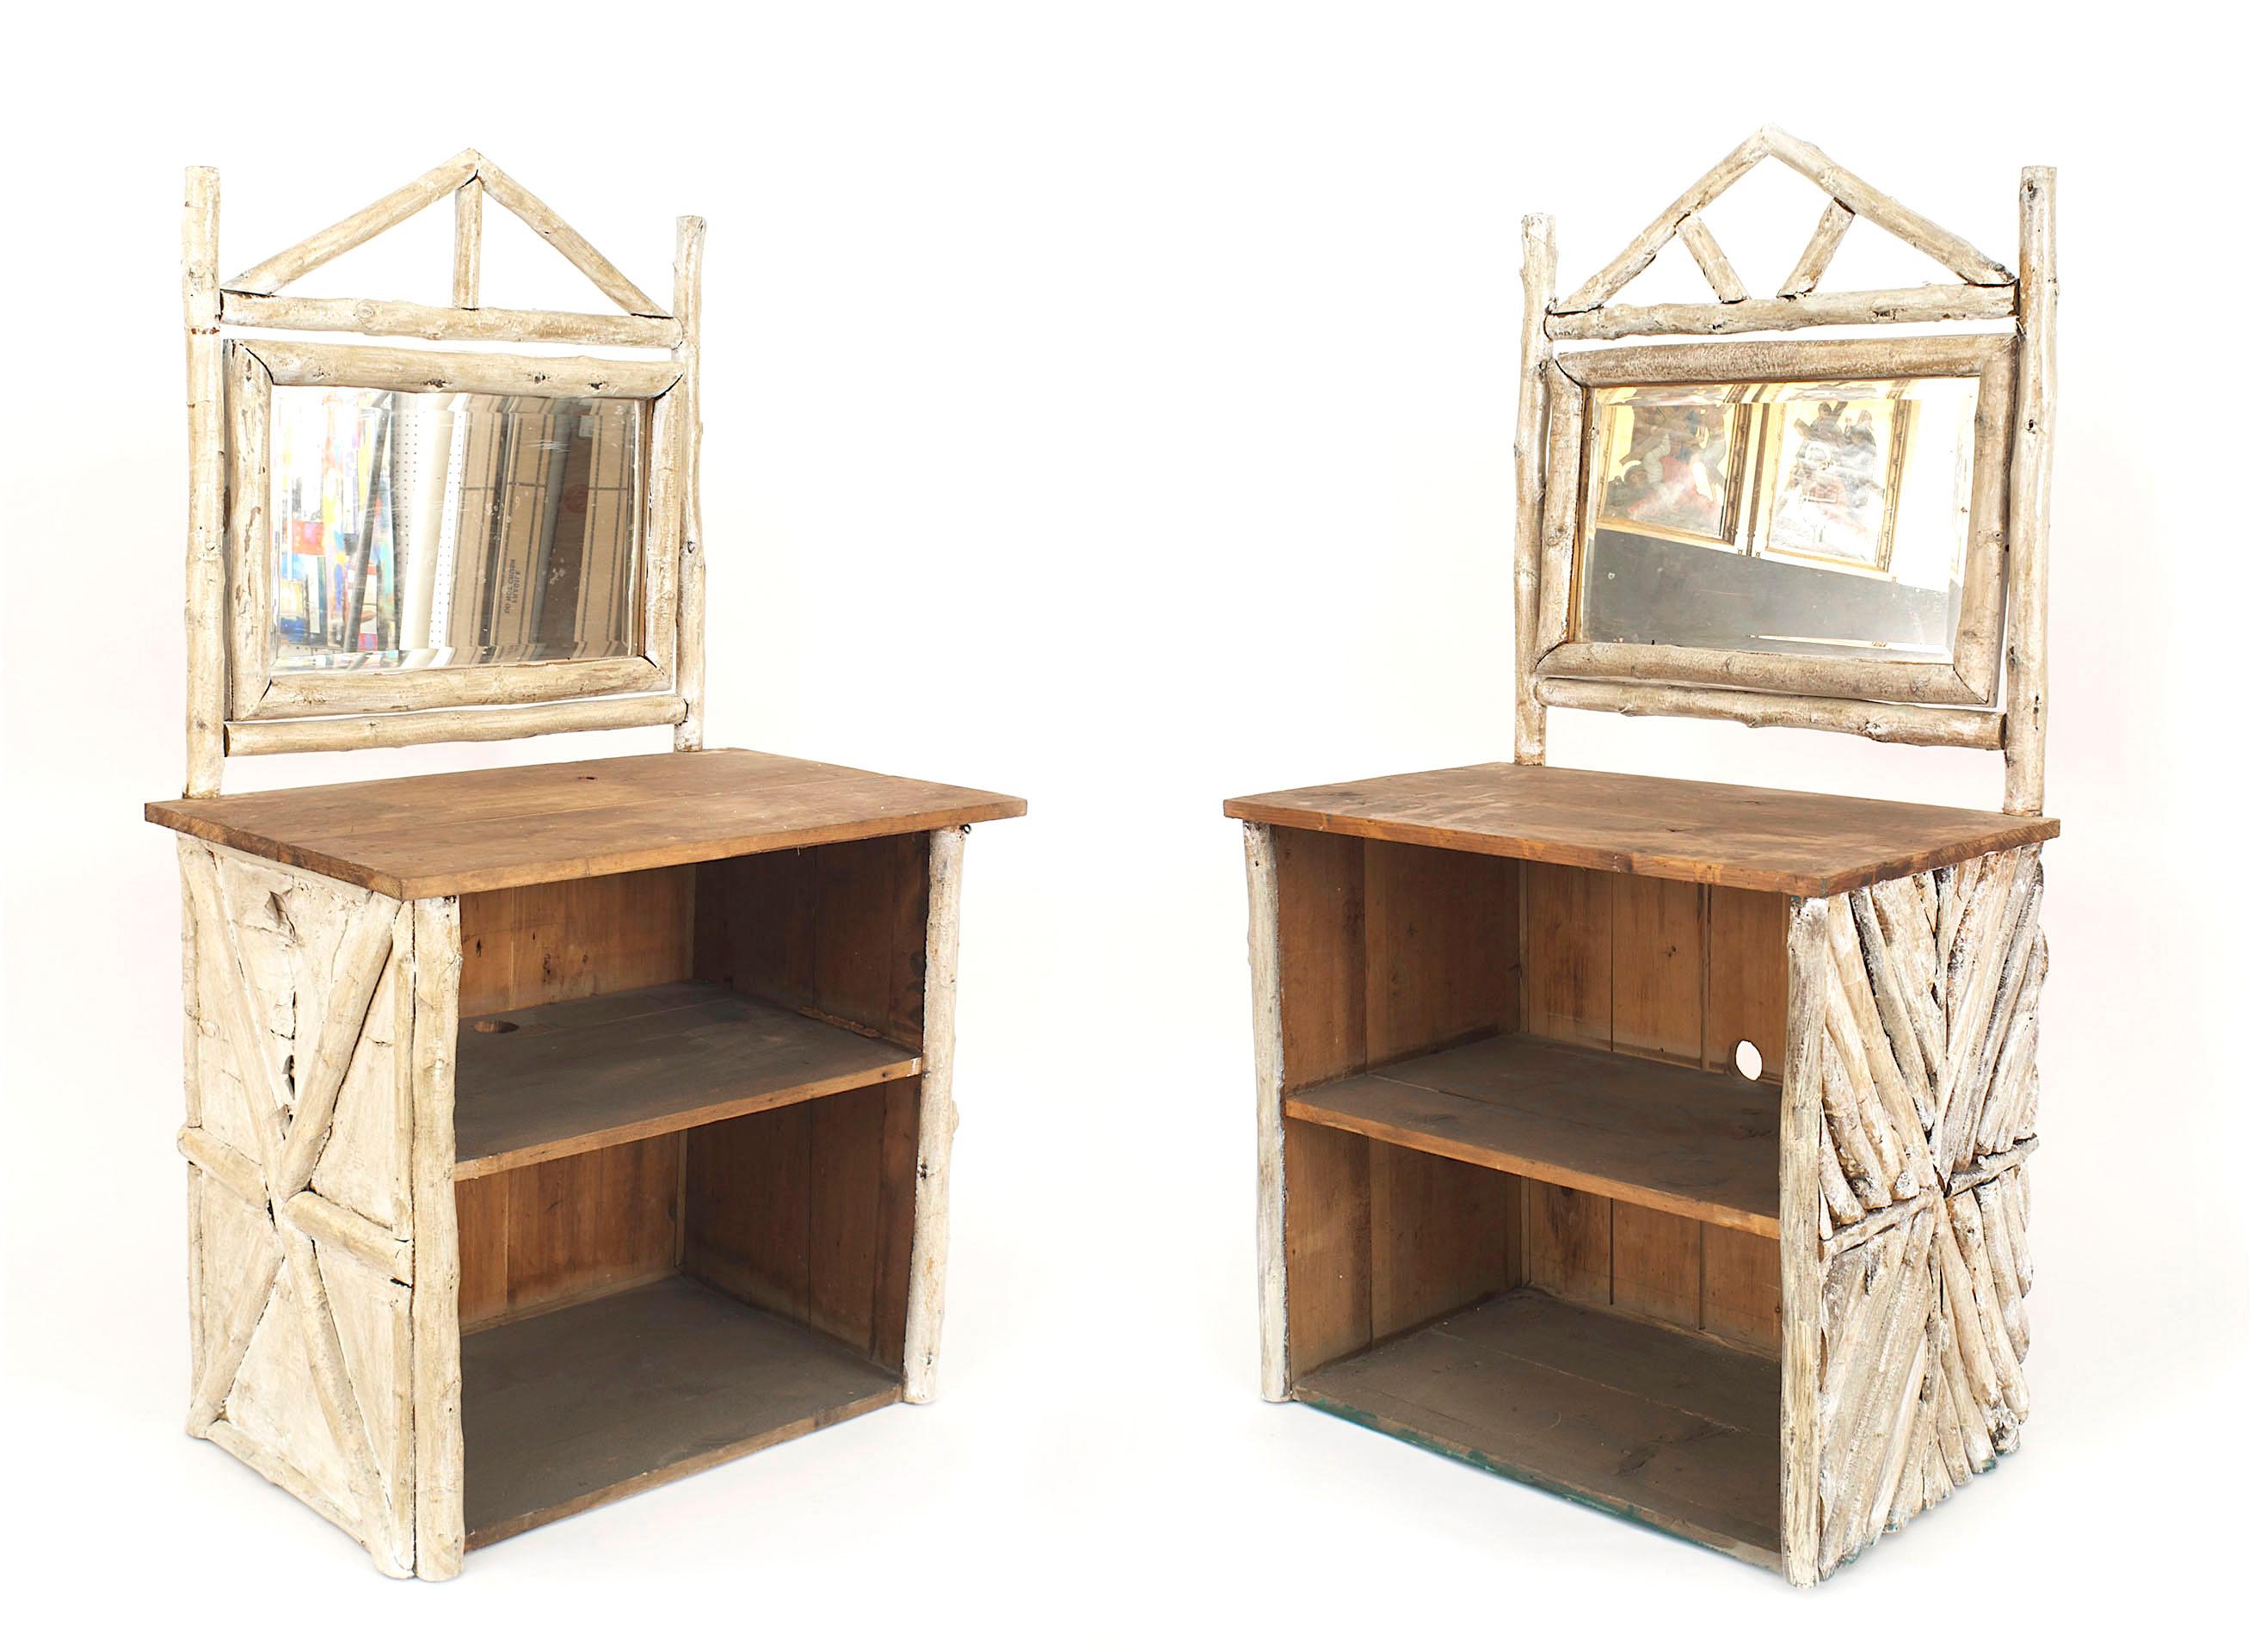 2 Similar Rustic American Adirondack (1920s) birch wood and bark dresser cabinets with 2 open shelves under a pine top with a mirror having a pediment framed top (PRICED EACH)
